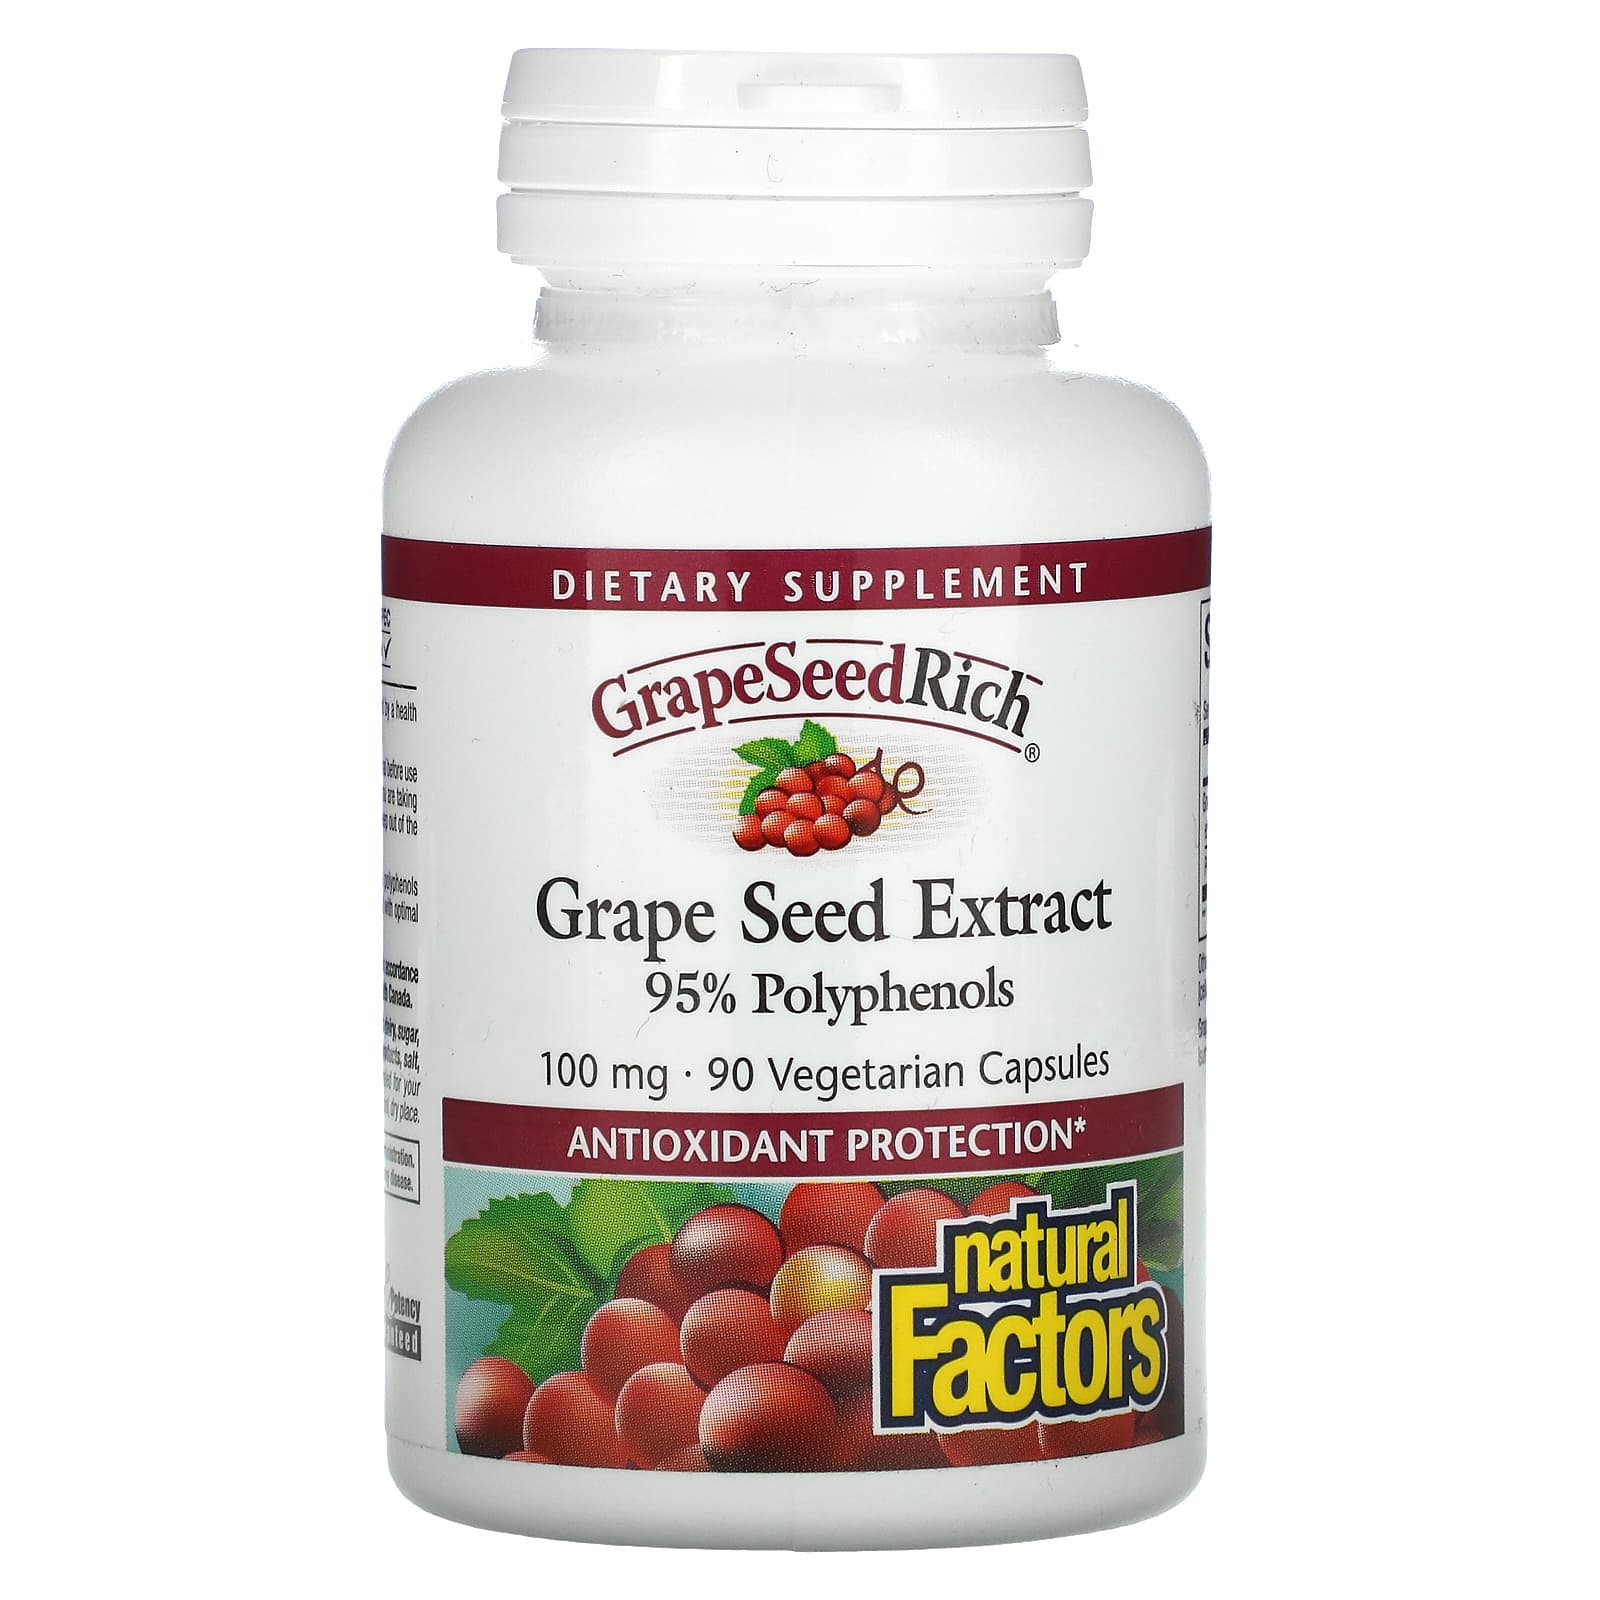 Natural Factors GrapeSeedRich, Grape Seed Extract, 100 Mg, 90 Vegetarian Capsules